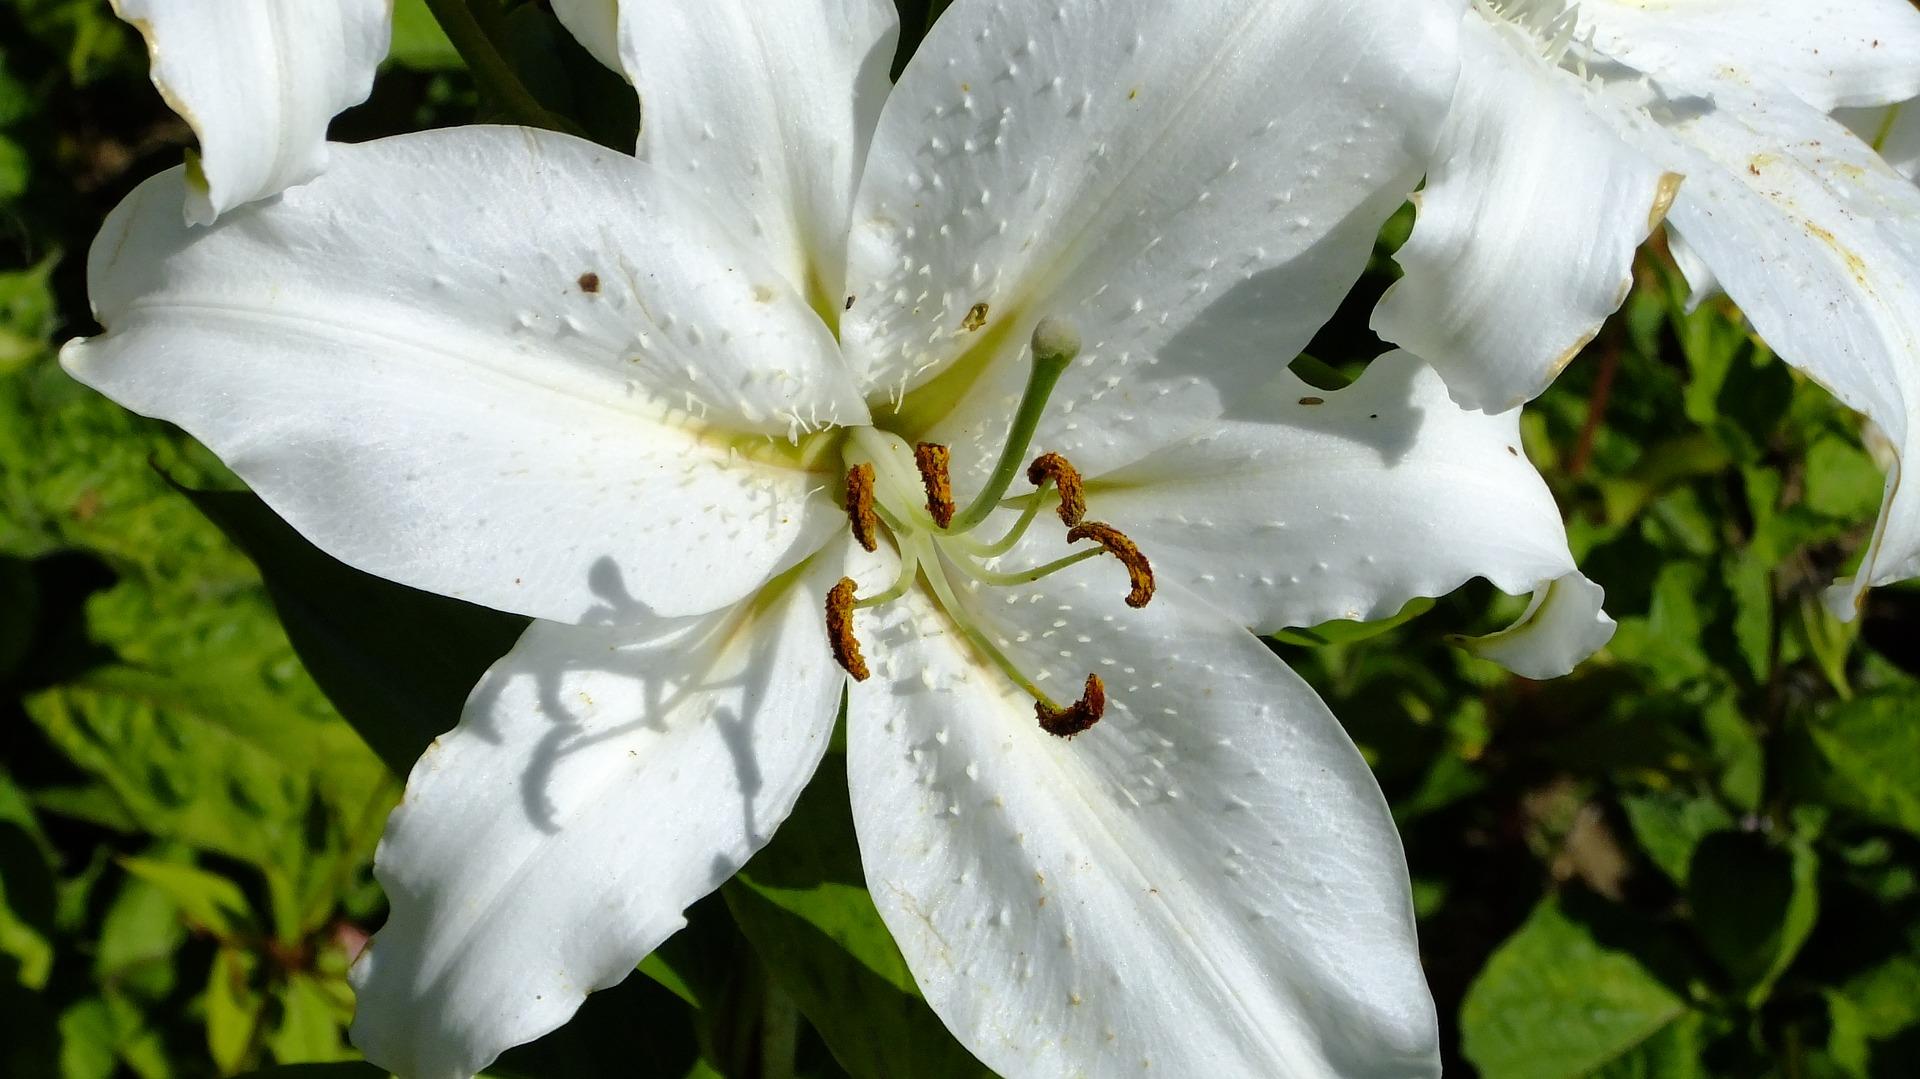 Lilies Auratum Lily 'Casa Blanca 16/18' - Outdoor Lilies (Shipping begins Jan. 2021) from Leo Berbee Bulb Company